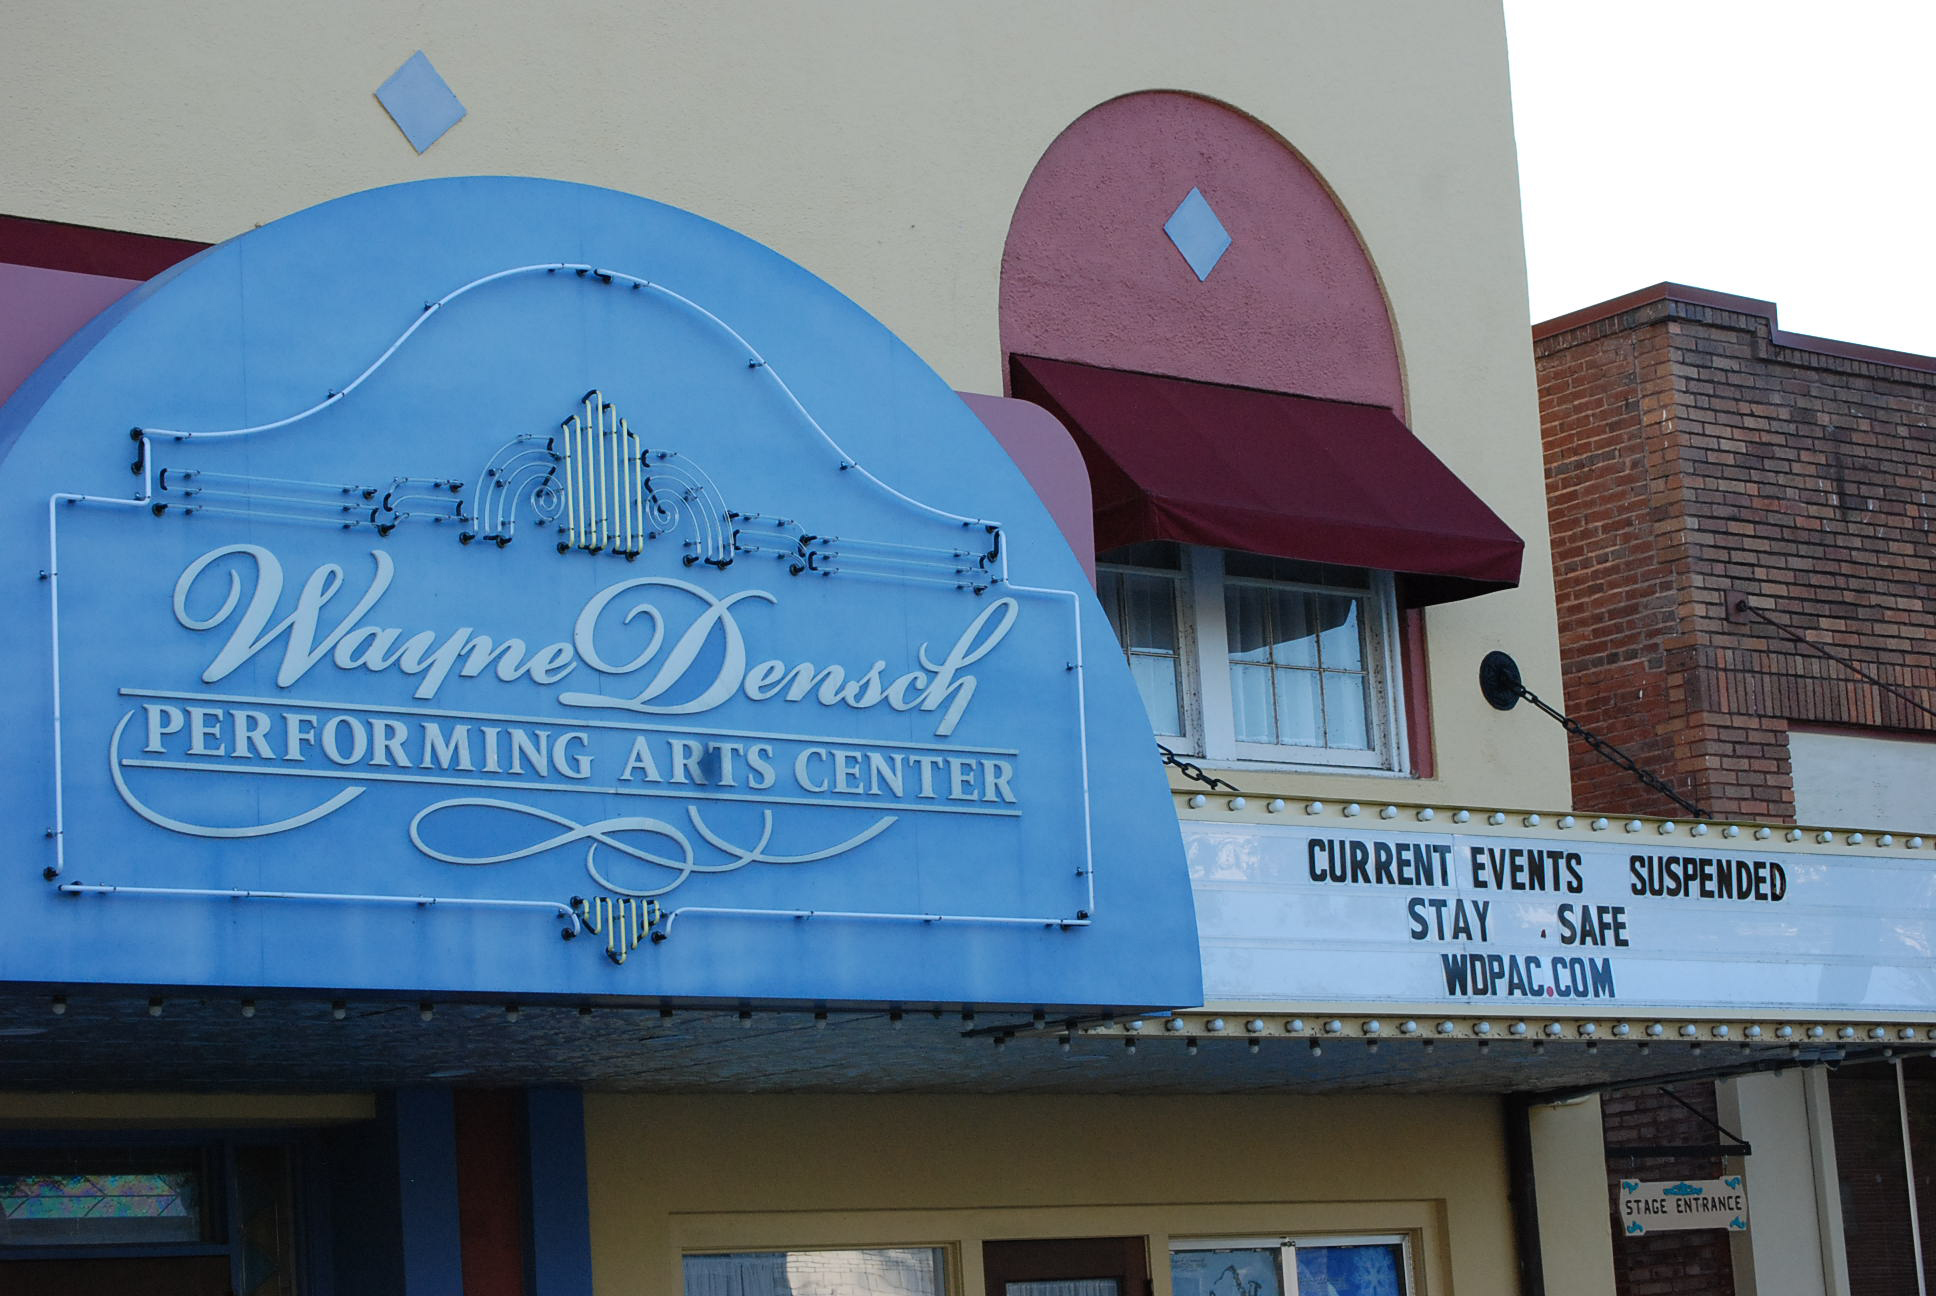 Sanford’s theaters look forward to opening their doors, providing